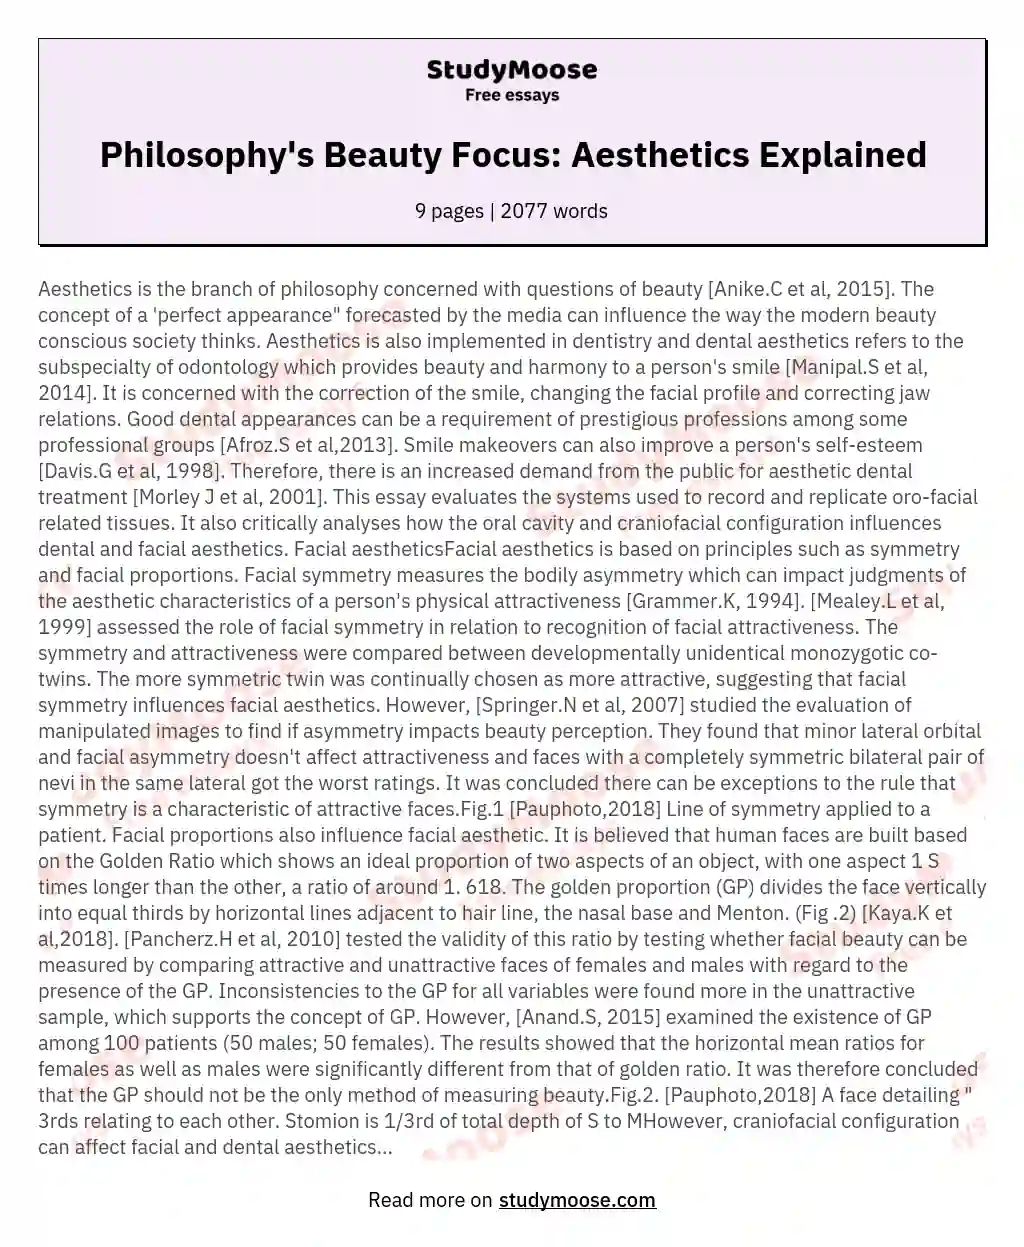 Aesthetics is the branch of philosophy concerned with questions of beauty [AnikeC